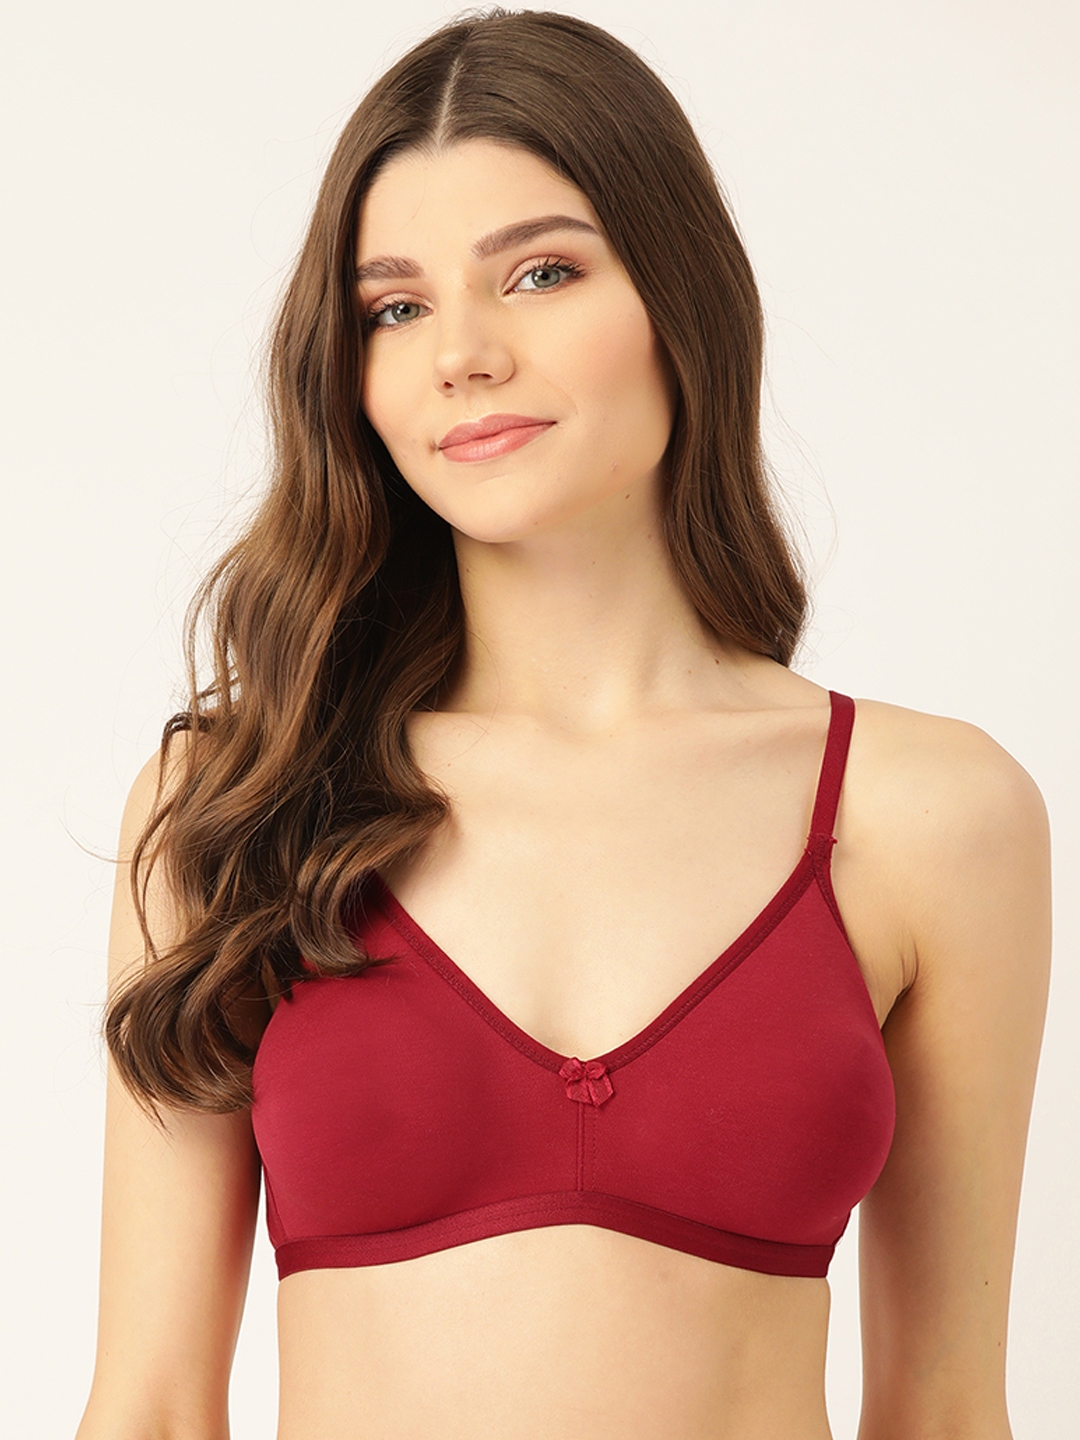 Lady Lyka Maroon Solid Non-Wired Non Padded Pure Cotton T-shirt Bra  LIBERTY-01-MRN